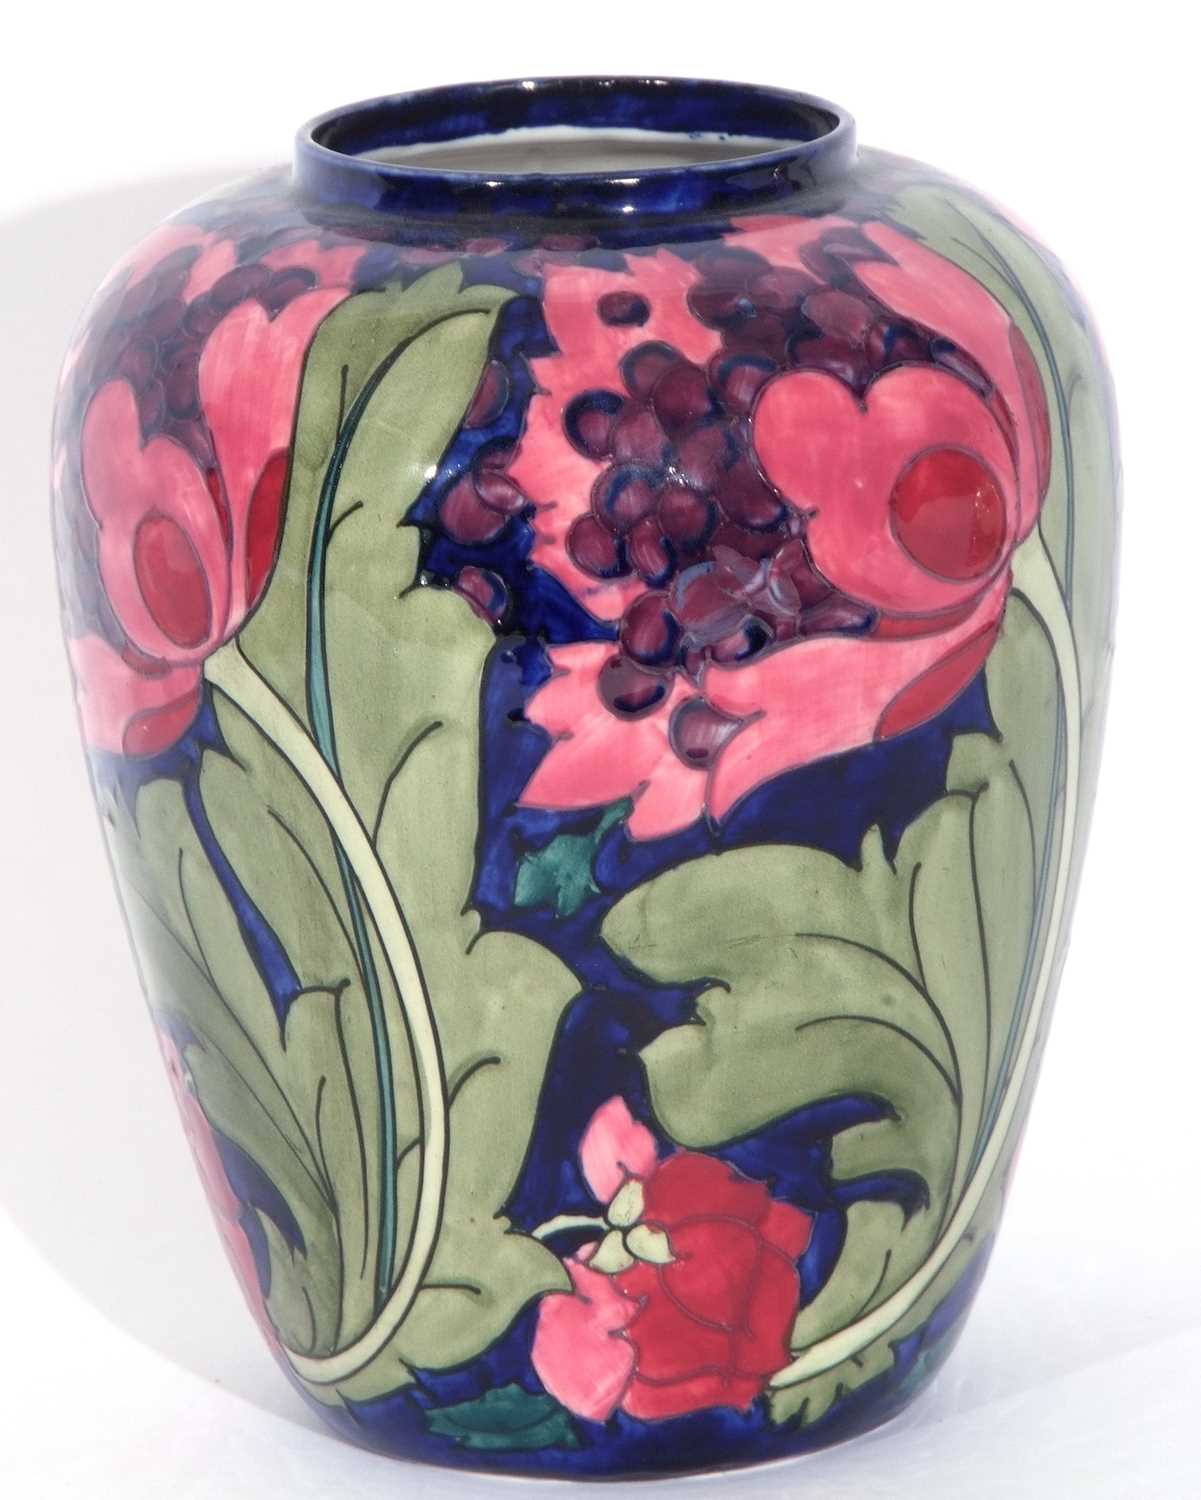 Bursley ware seed poppy style vase after a design by Charlotte Rhead, 21cm high - Image 2 of 4